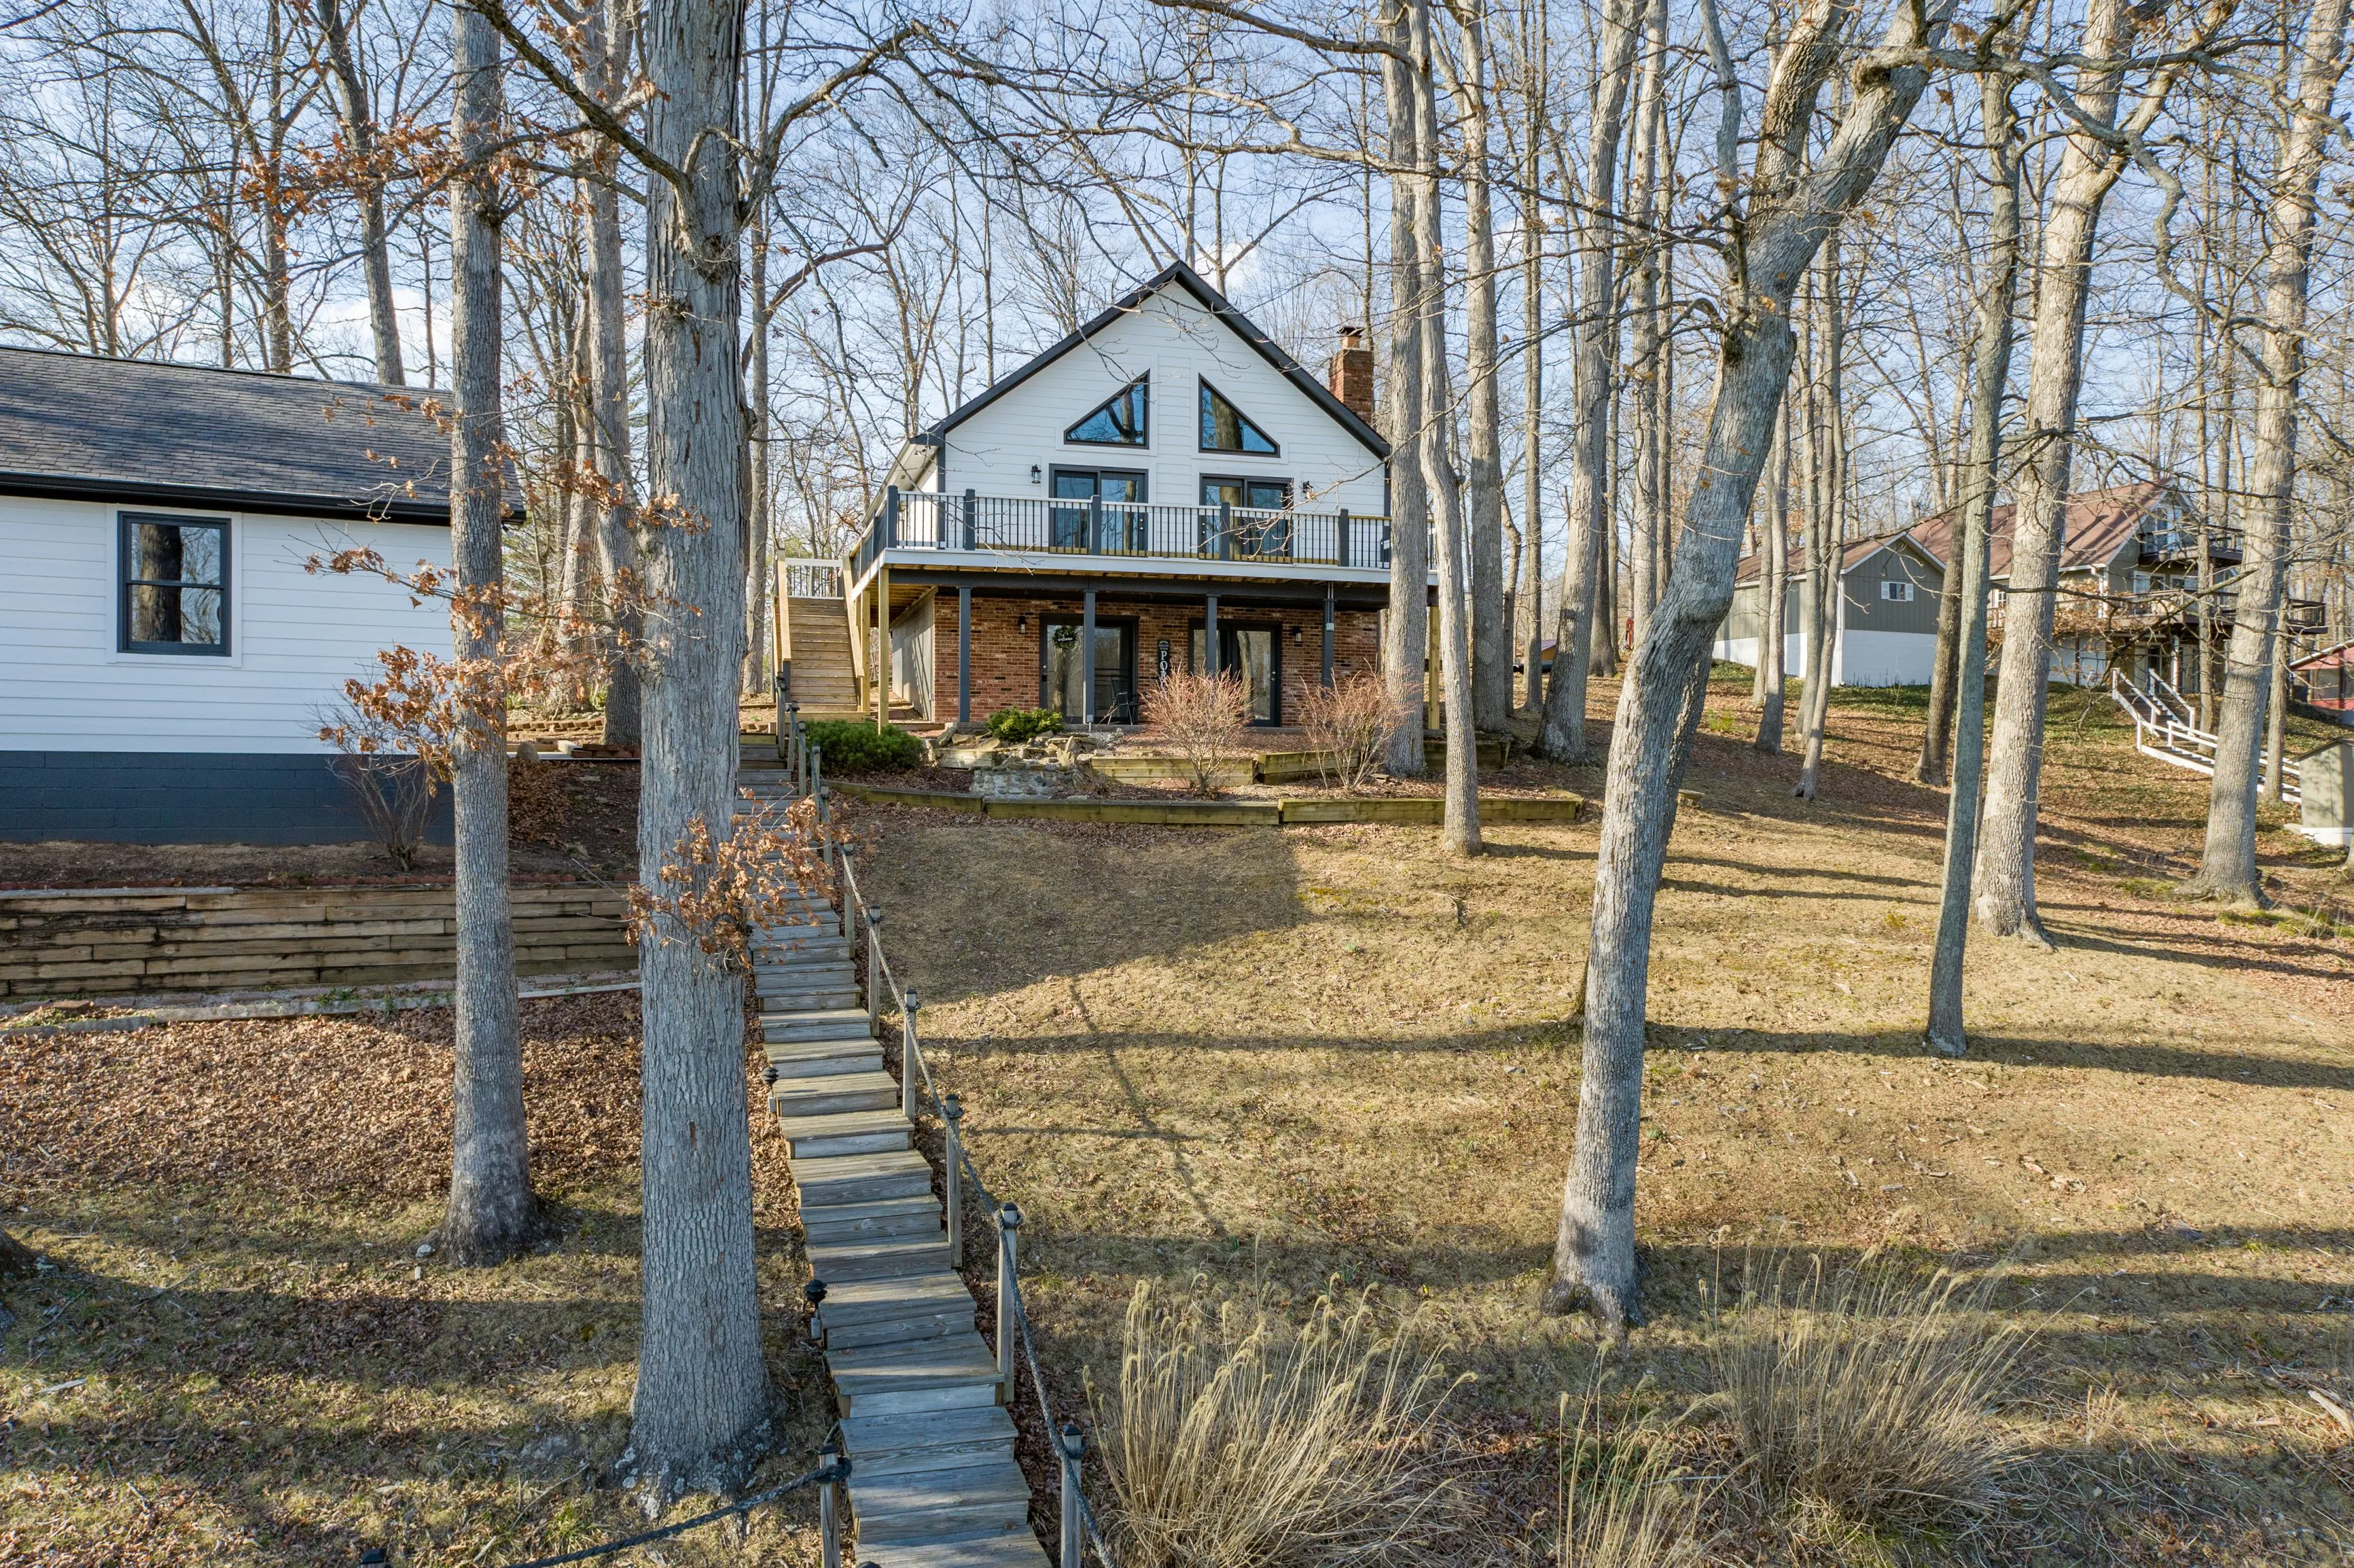 A cozy two-story house with a front porch, surrounded by bare trees and a lawn covered with brown leaves, a stone walkway leads up to the house.